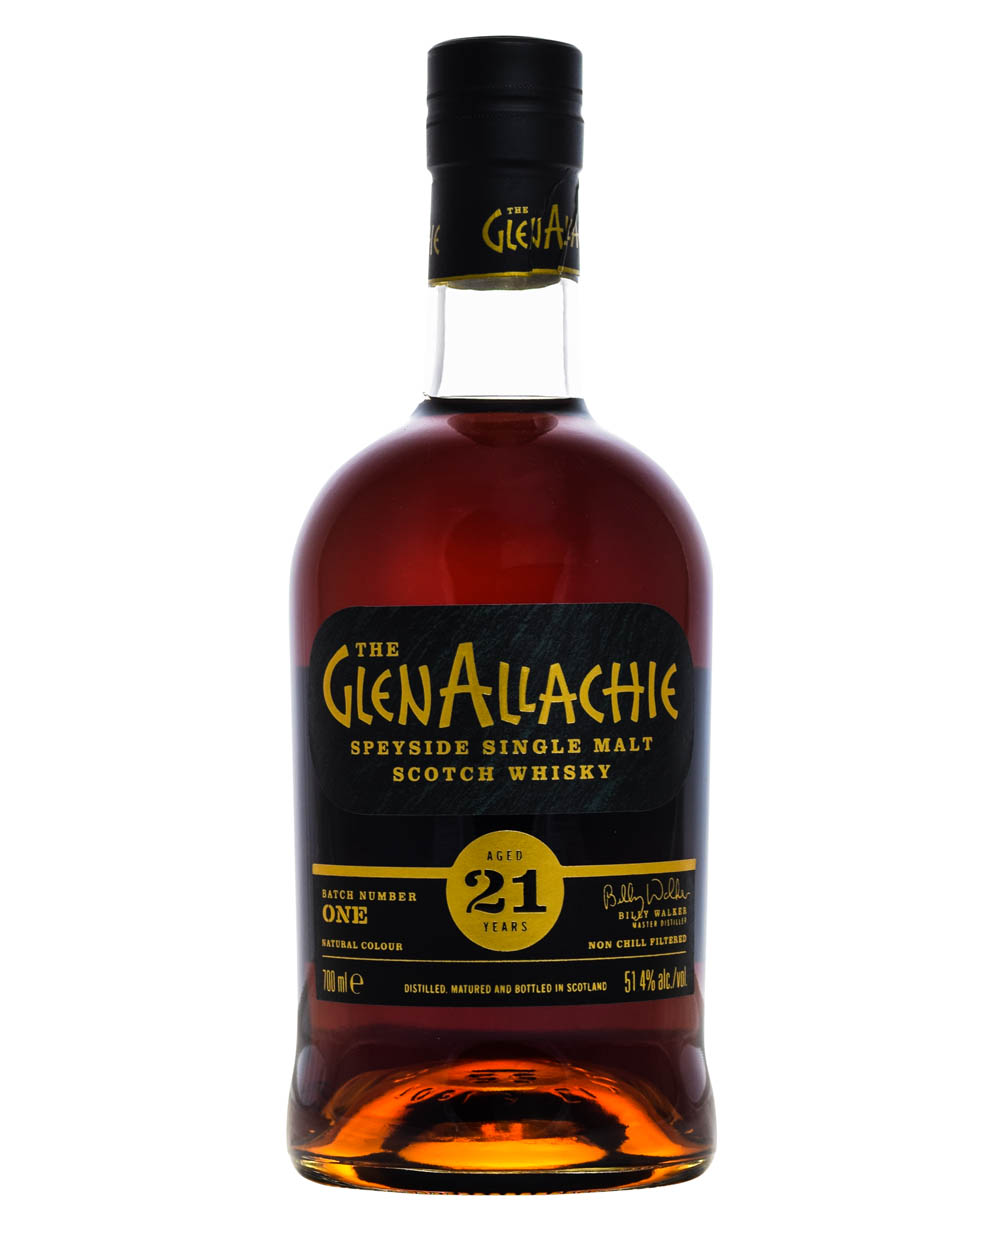 Glenallachie 21 Years Old Batch Number 1 2020 Musthave Malts MHM